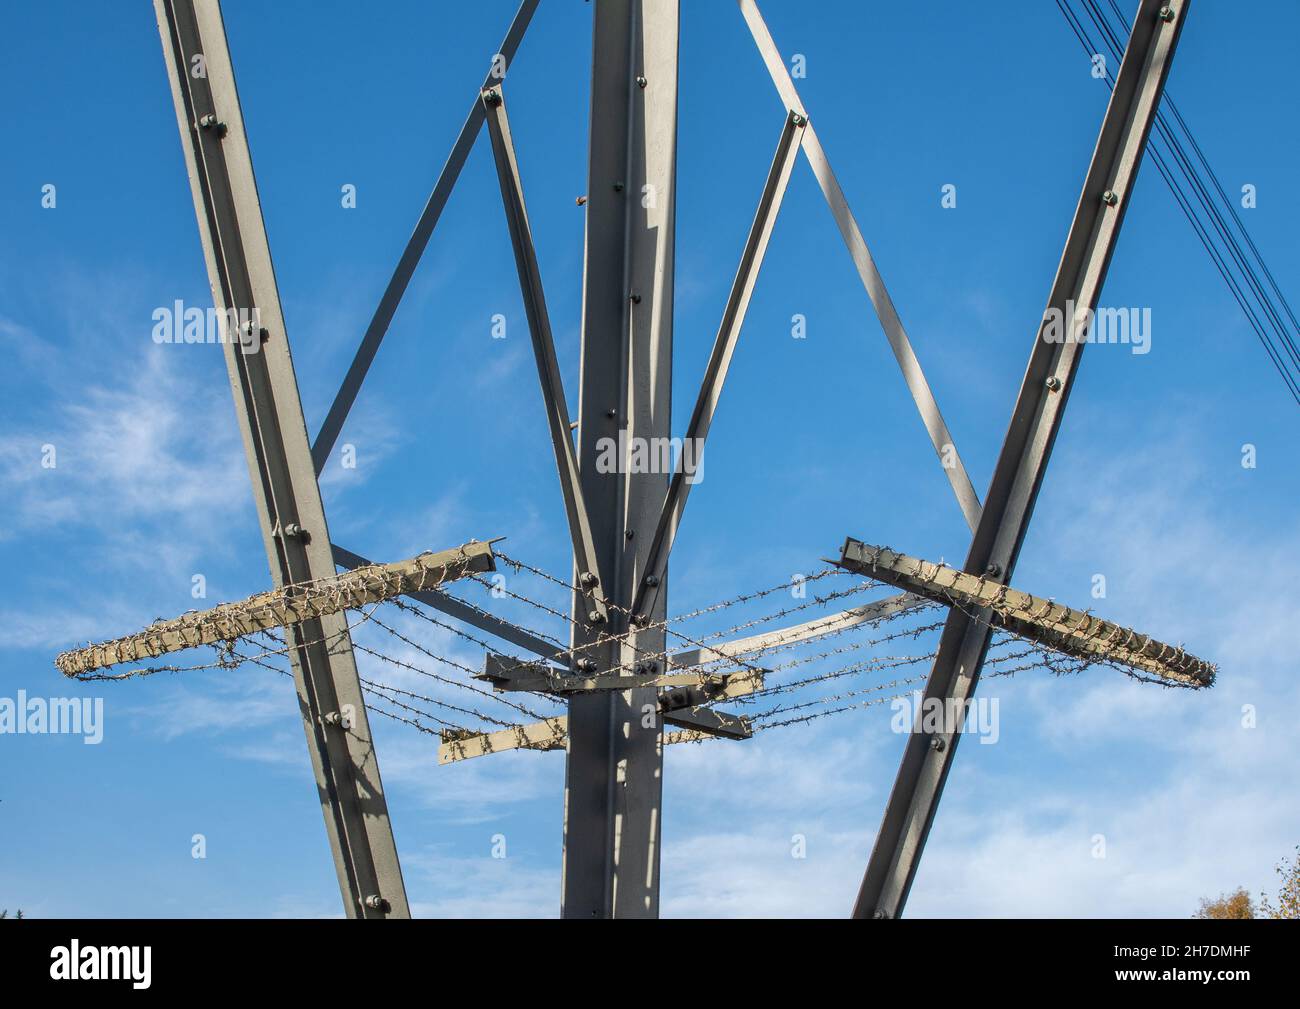 Anti climbing guard on electricity pylon with barbed wire on clear day with blue sky. Stock Photo